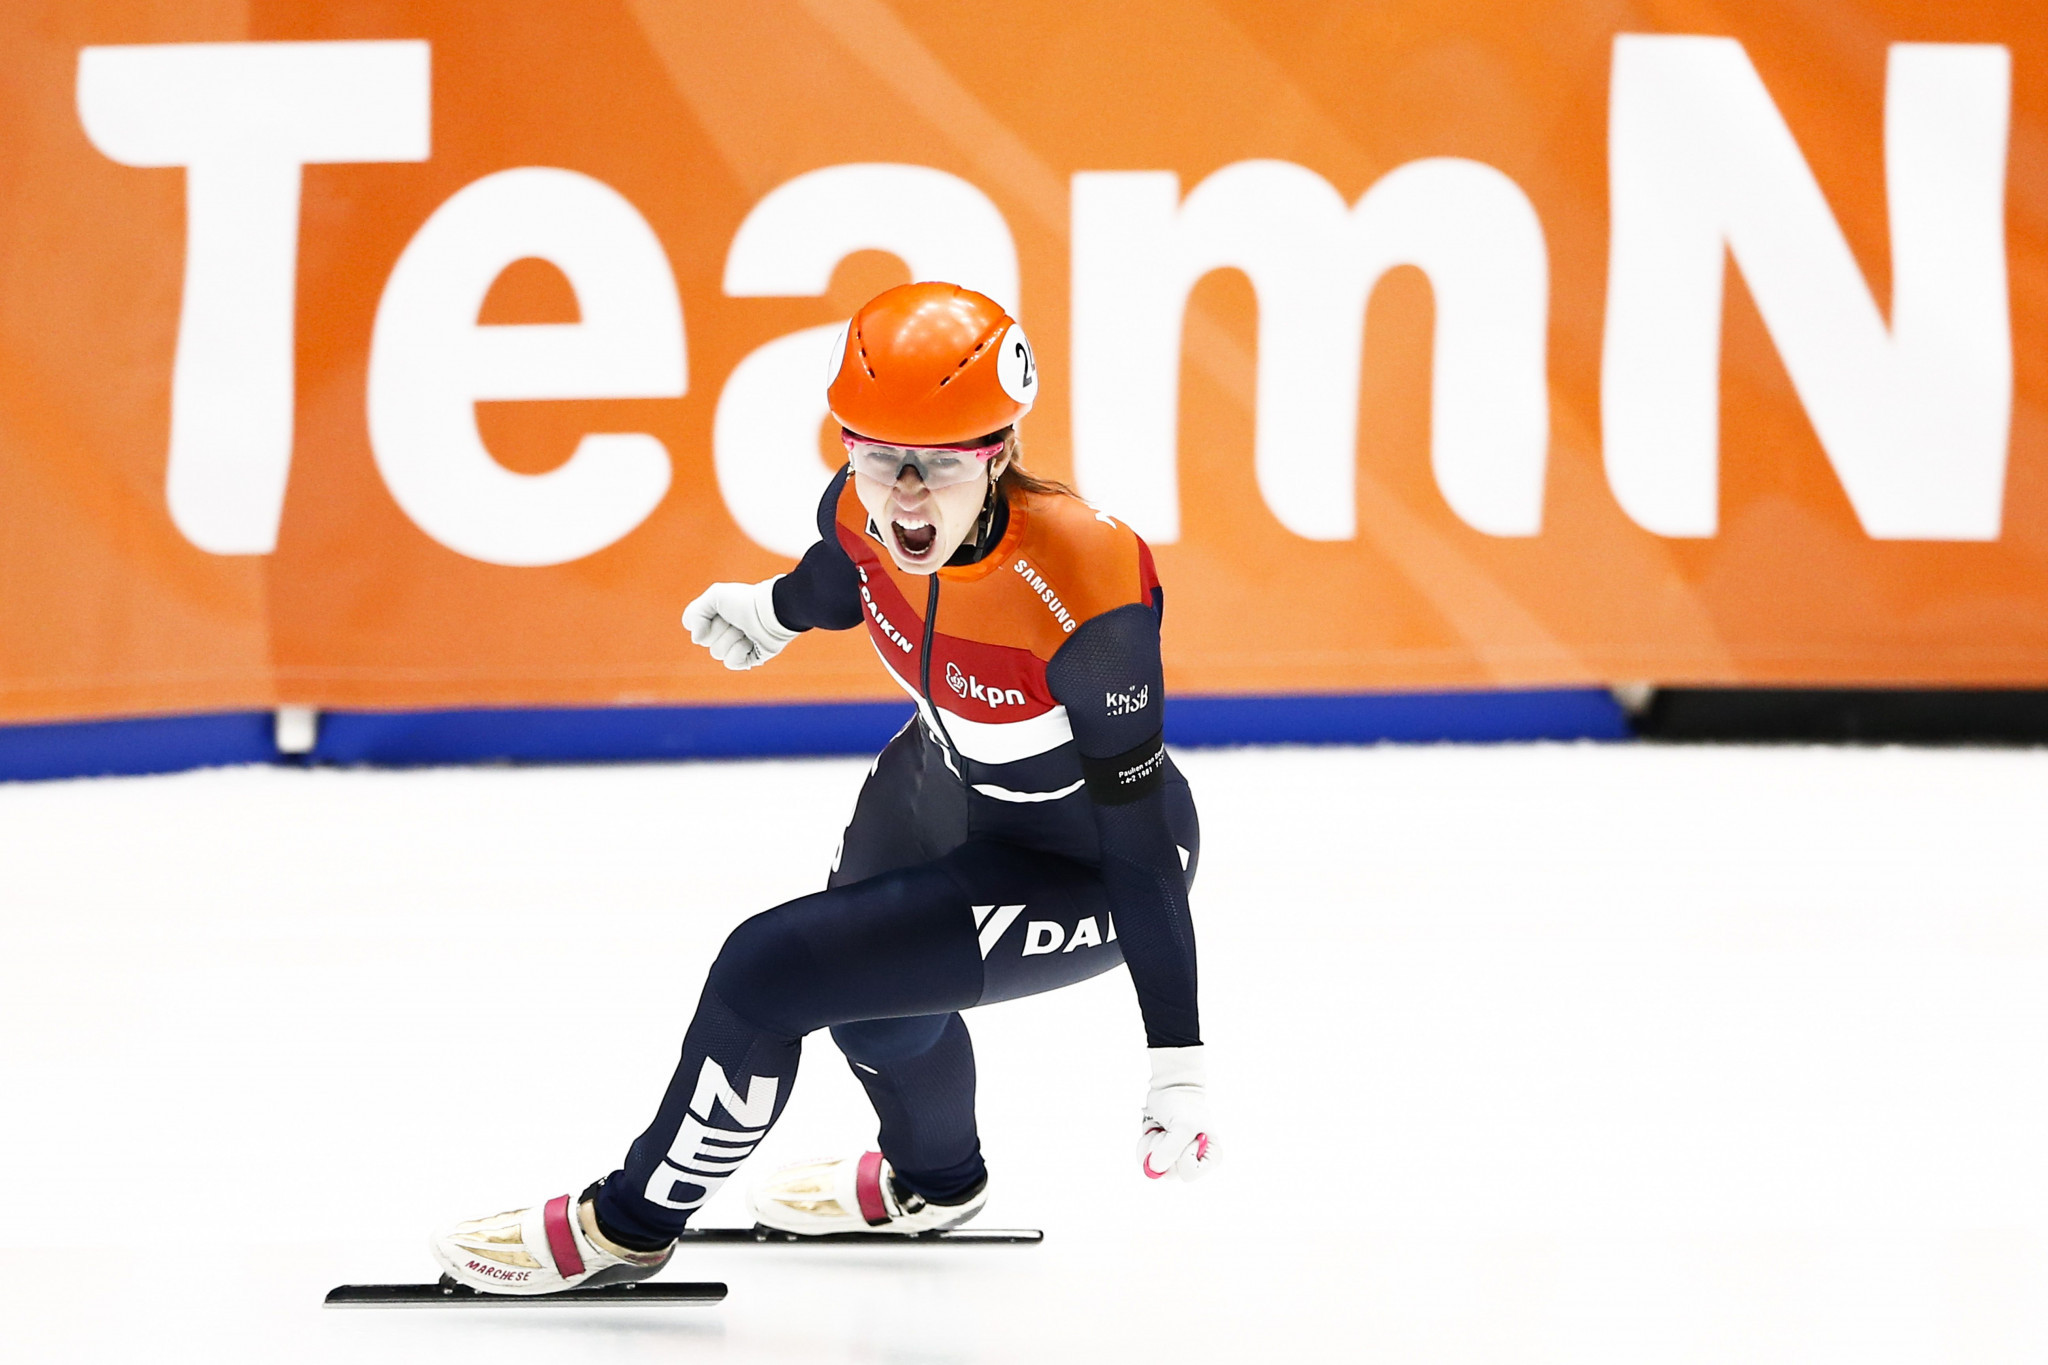 Schulting and Choi to resume rivalry as ISU Short Track World Cup season ends in Turin